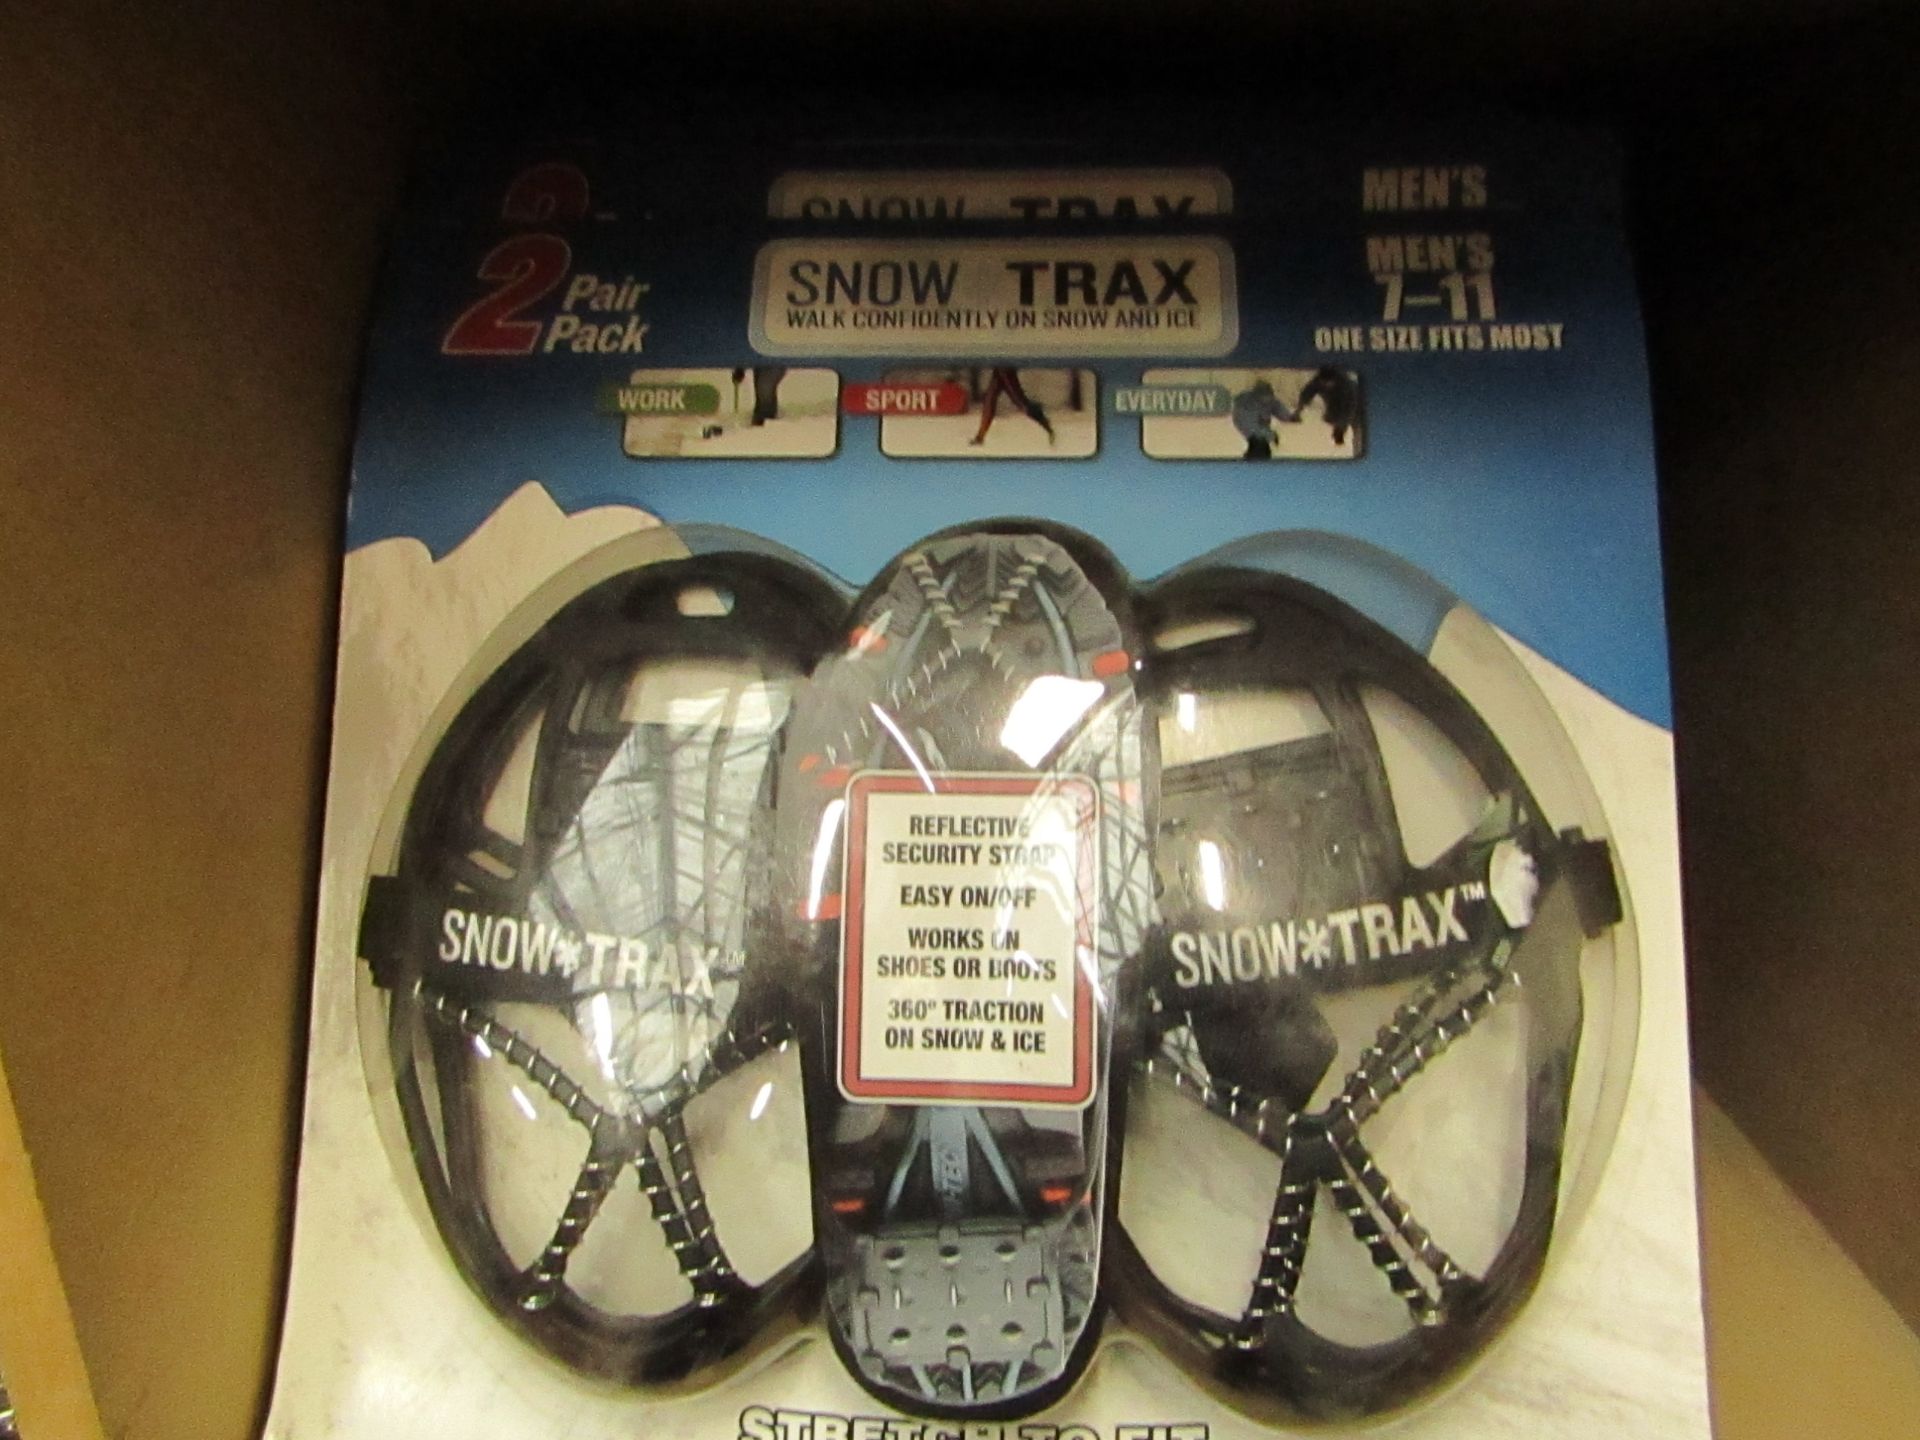 Snow Trax snow grips, 7 - 11, new and packaged.